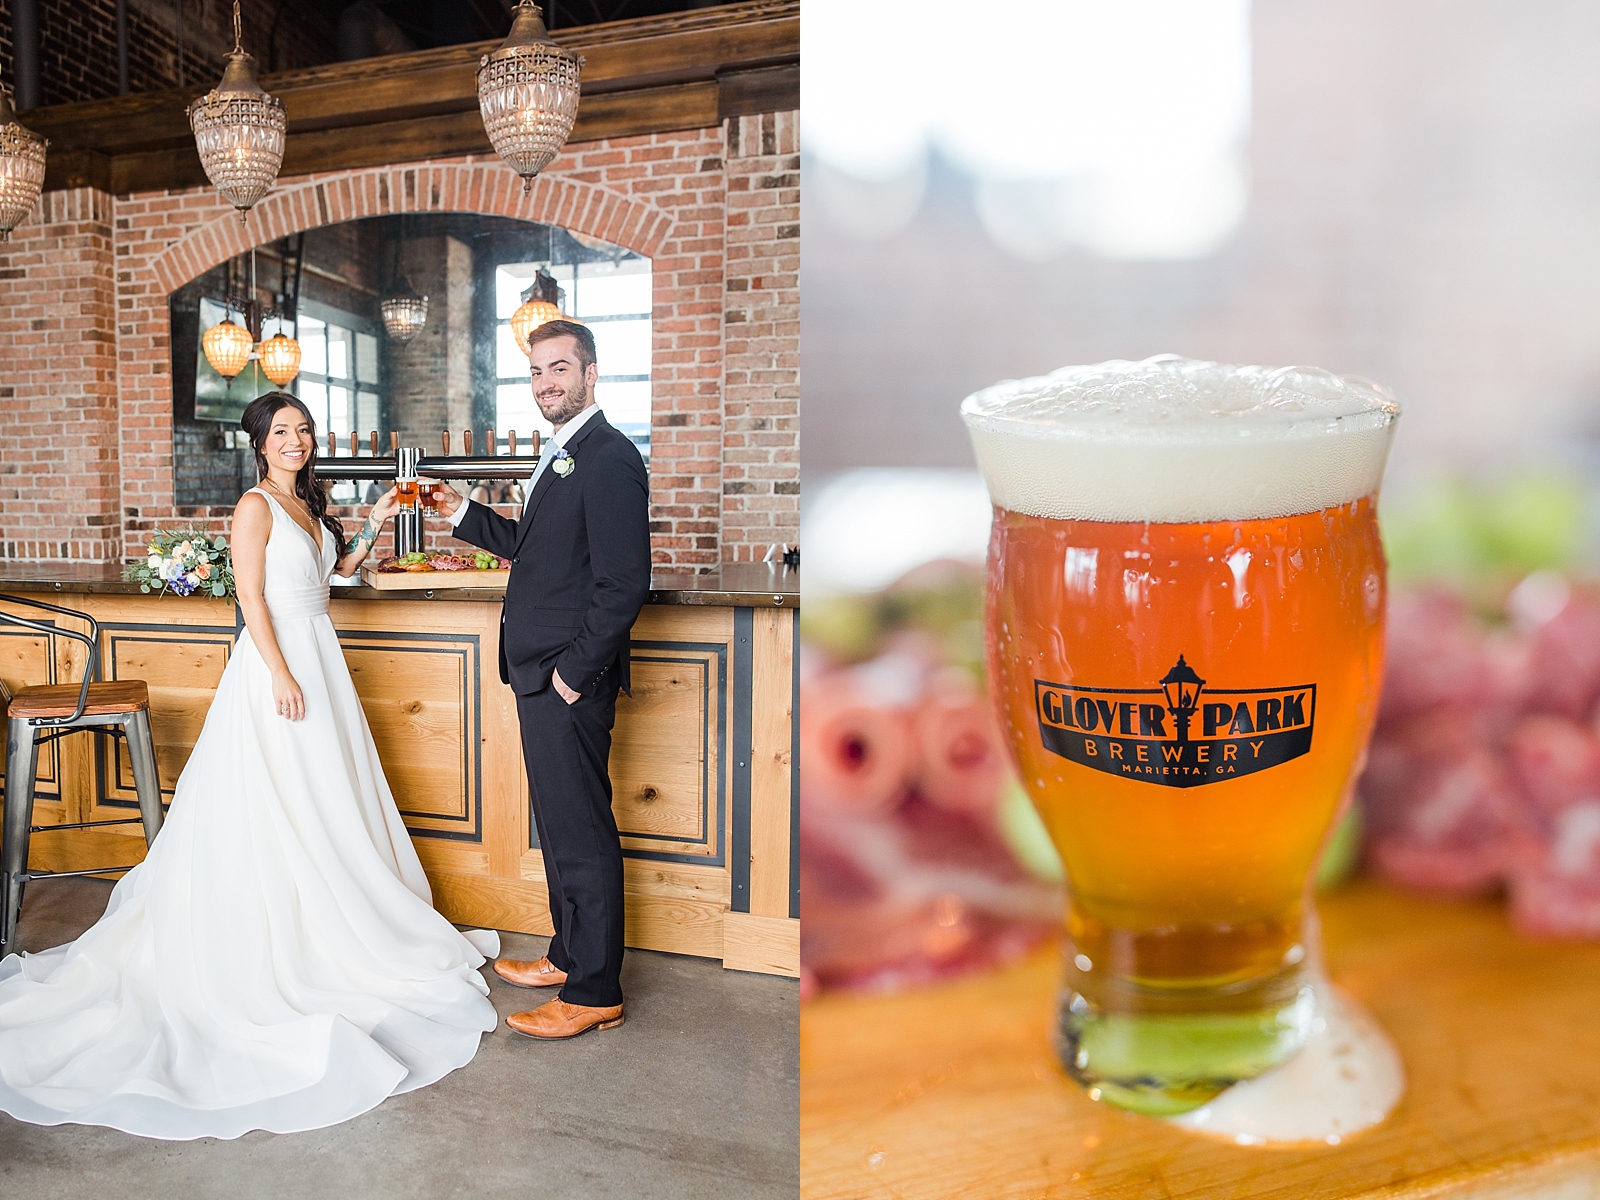 Glover Park Brewery Wedding Bride and Groom toasting with beer and detail of beer Photos